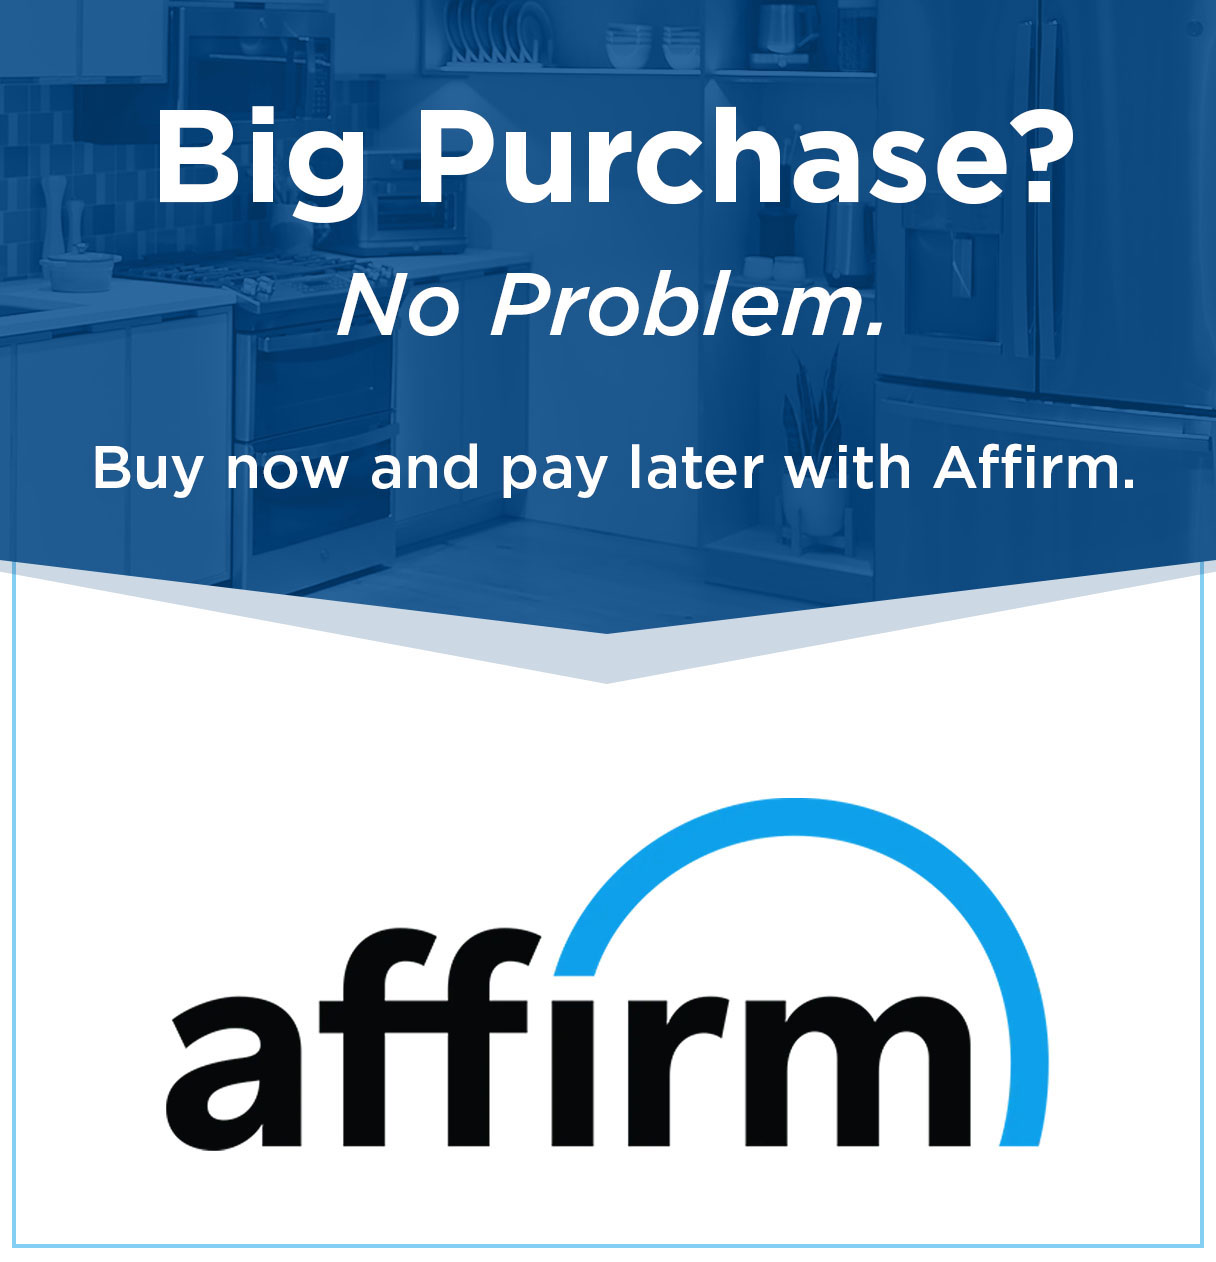 Big Purchase? No Problem. Buy now and pay later with Affirm.